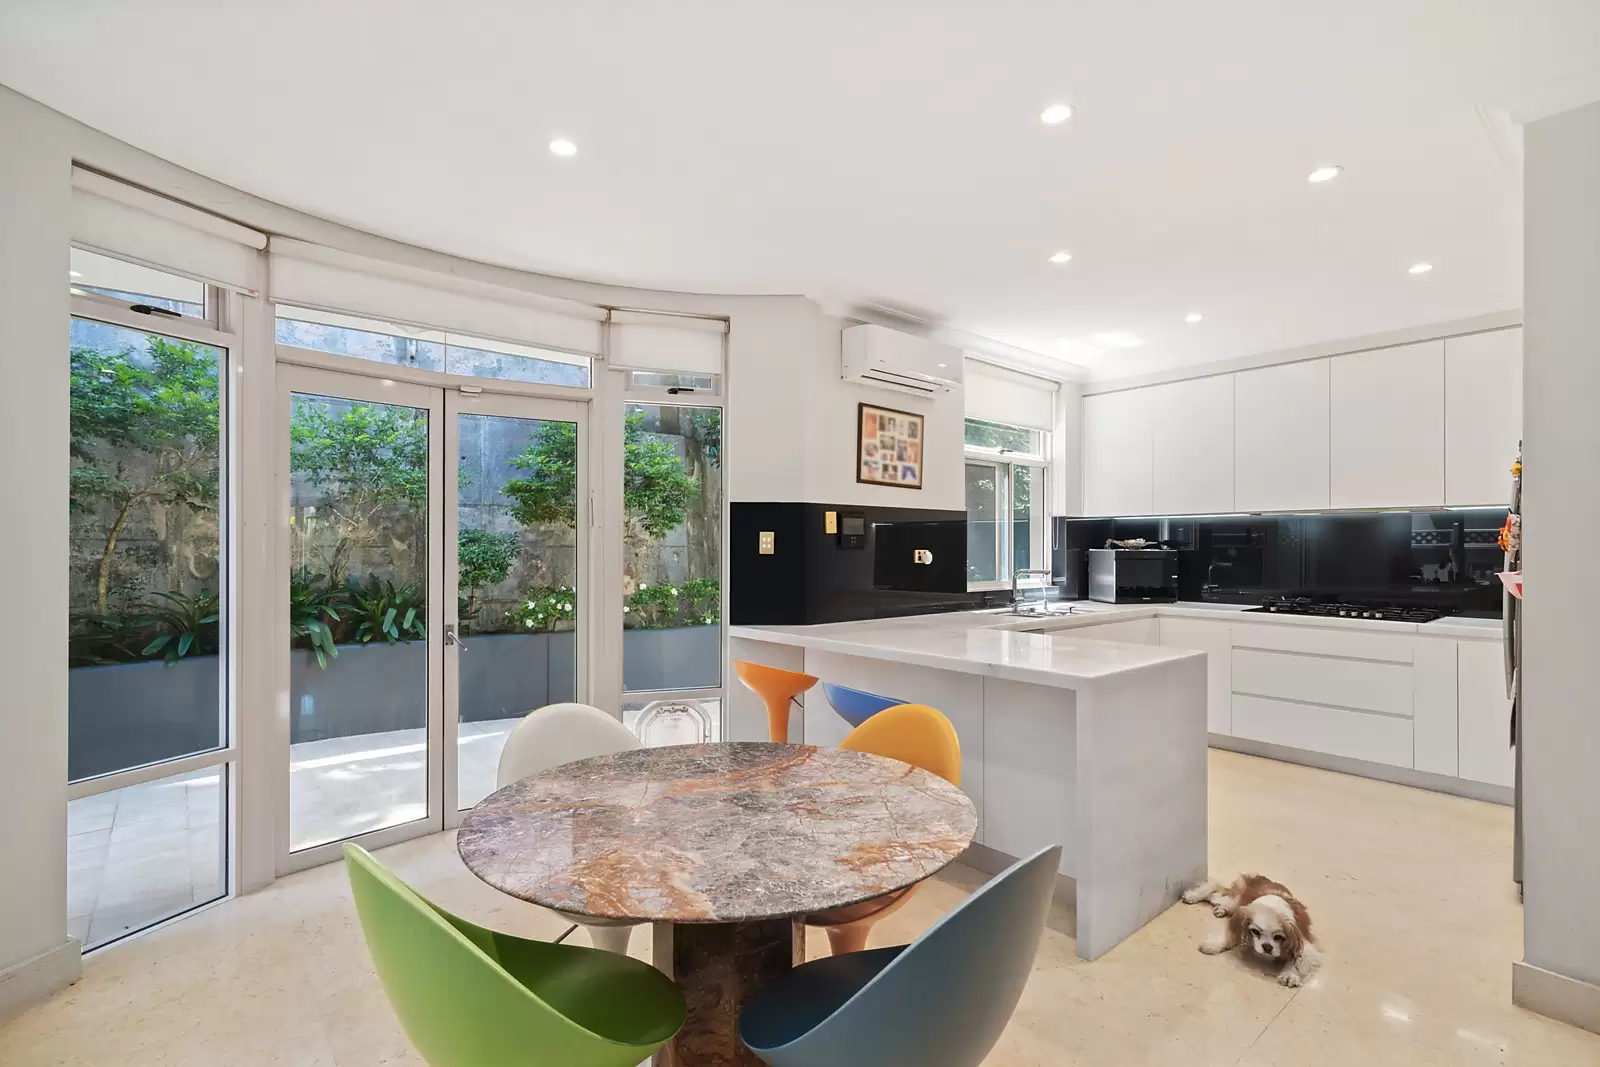 Photo #9: 22/17a Cooper Park Road, Bellevue Hill - Sold by Sydney Sotheby's International Realty